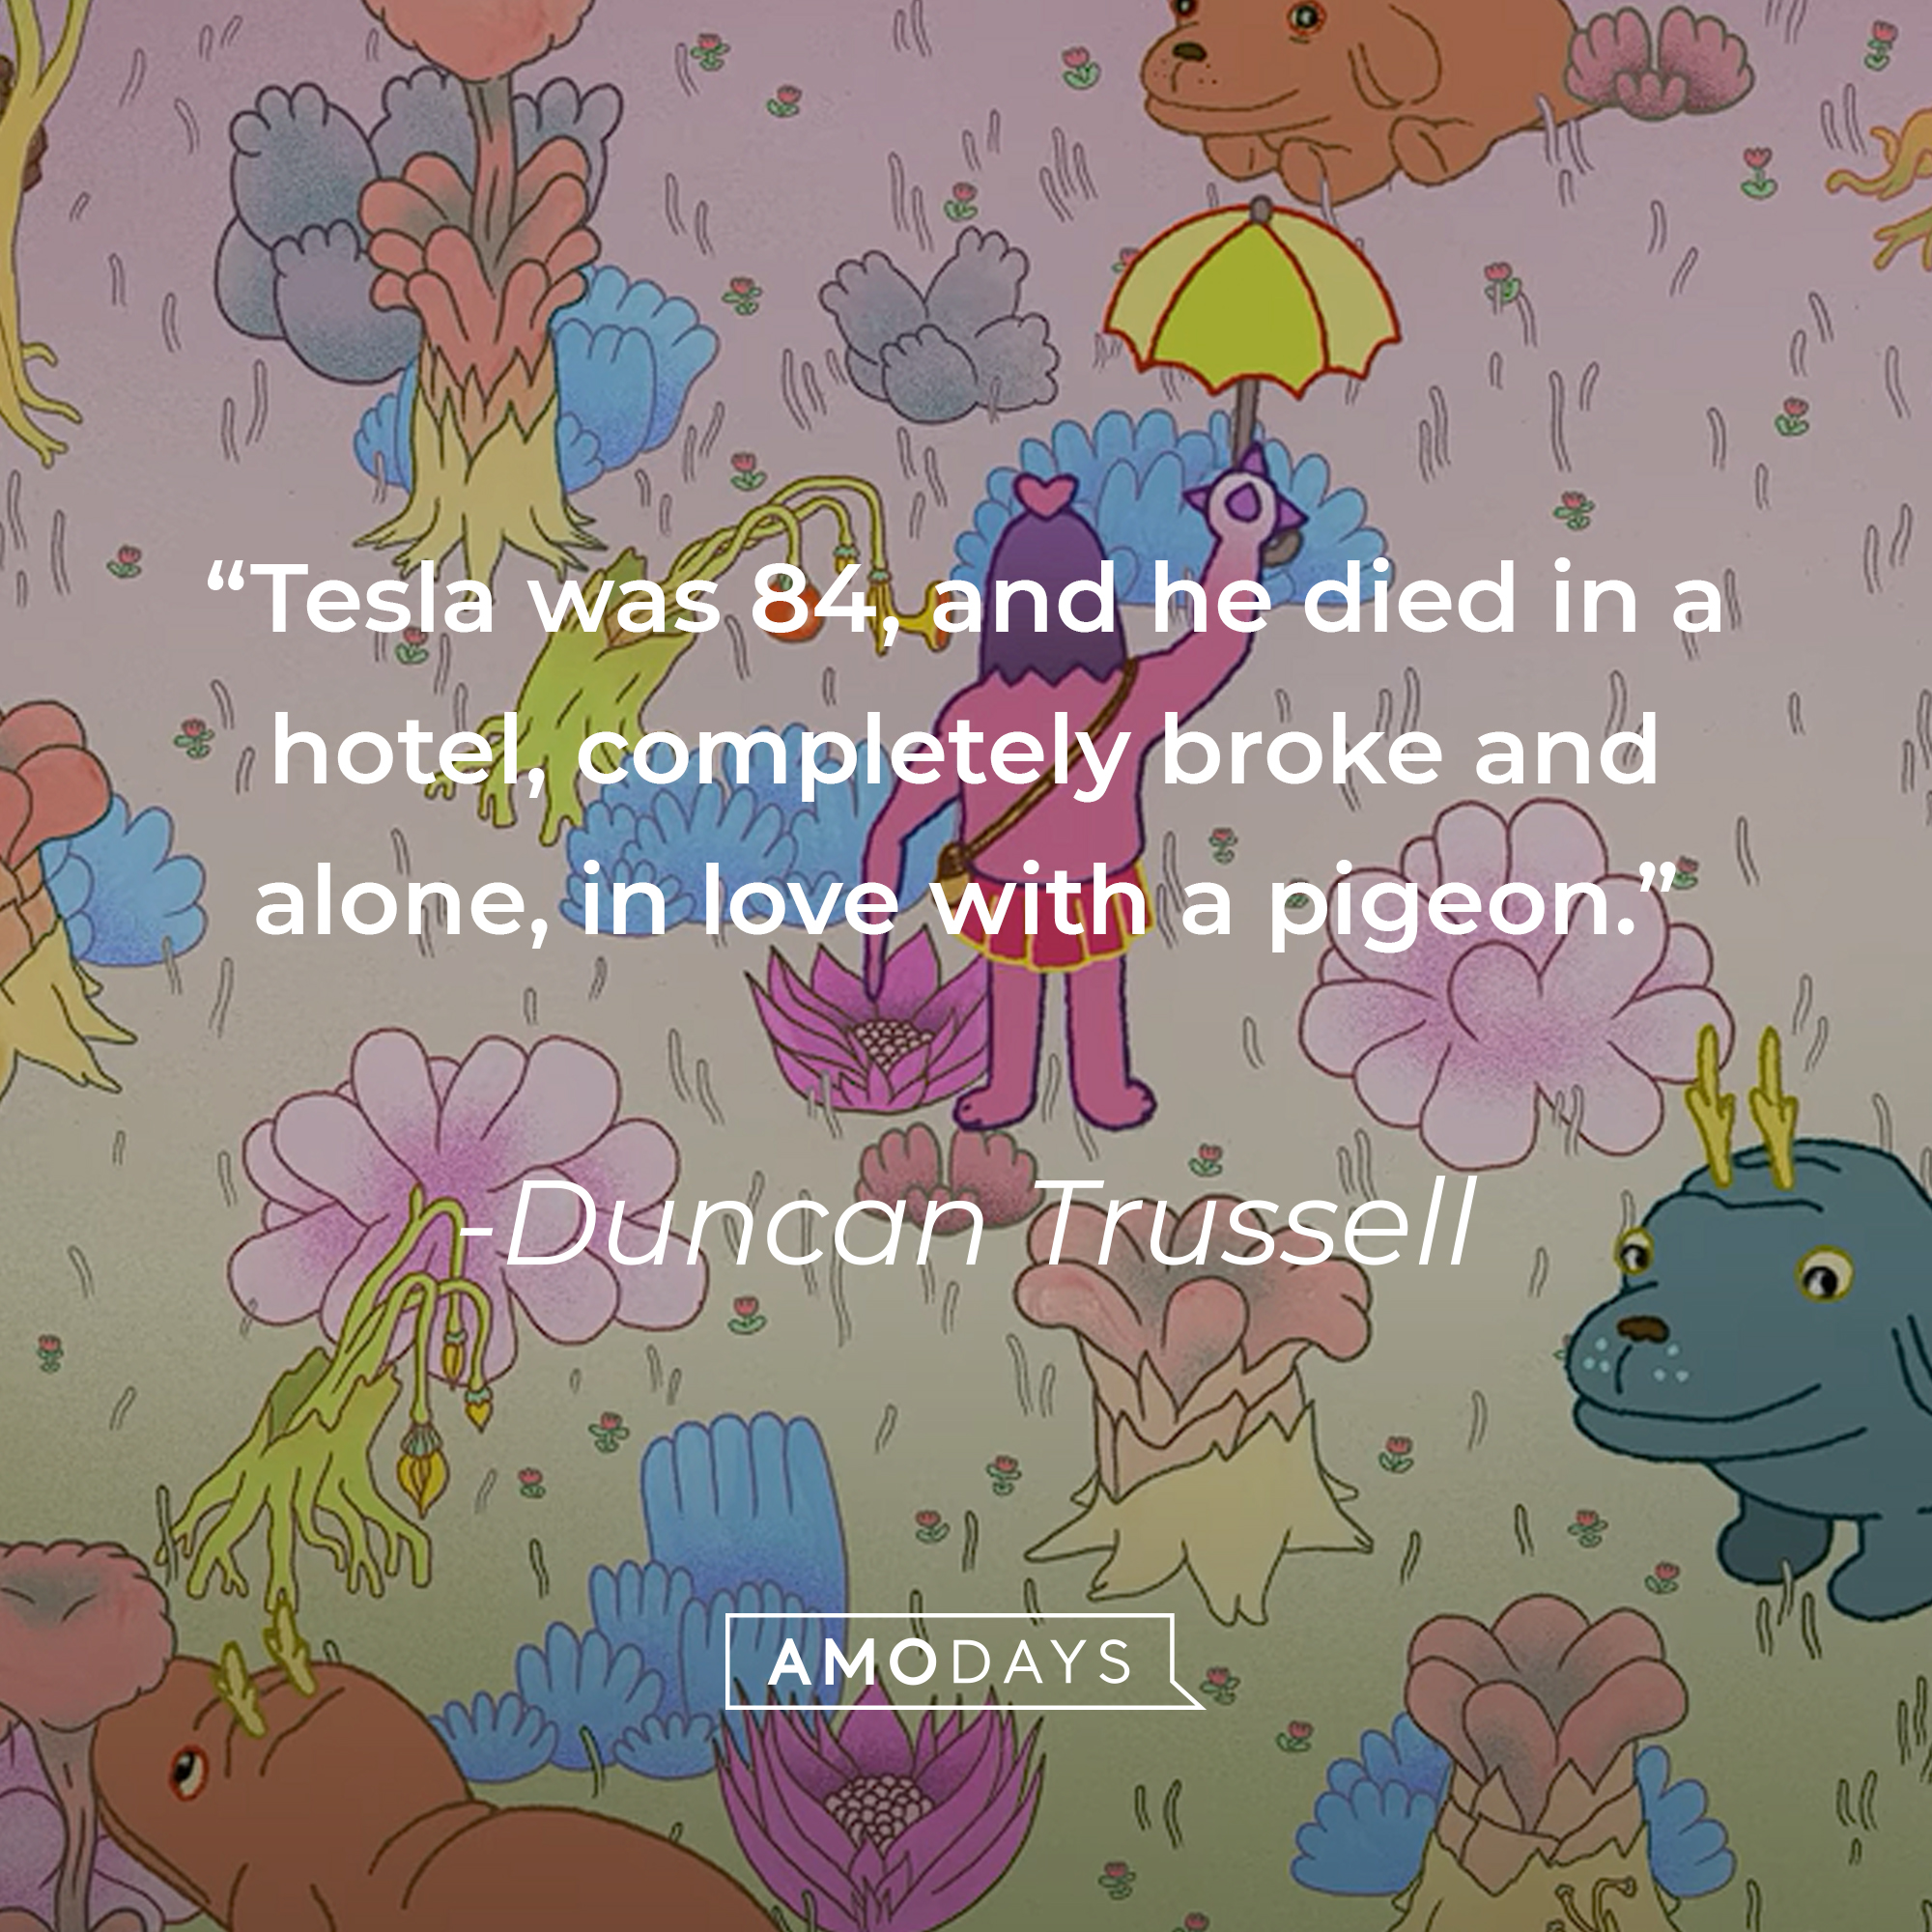 Duncan Trussell's quote: "Tesla was 84, and he died in a hotel, completely broke and alone, in love with a pigeon." | Source: youtube.com/Netflix